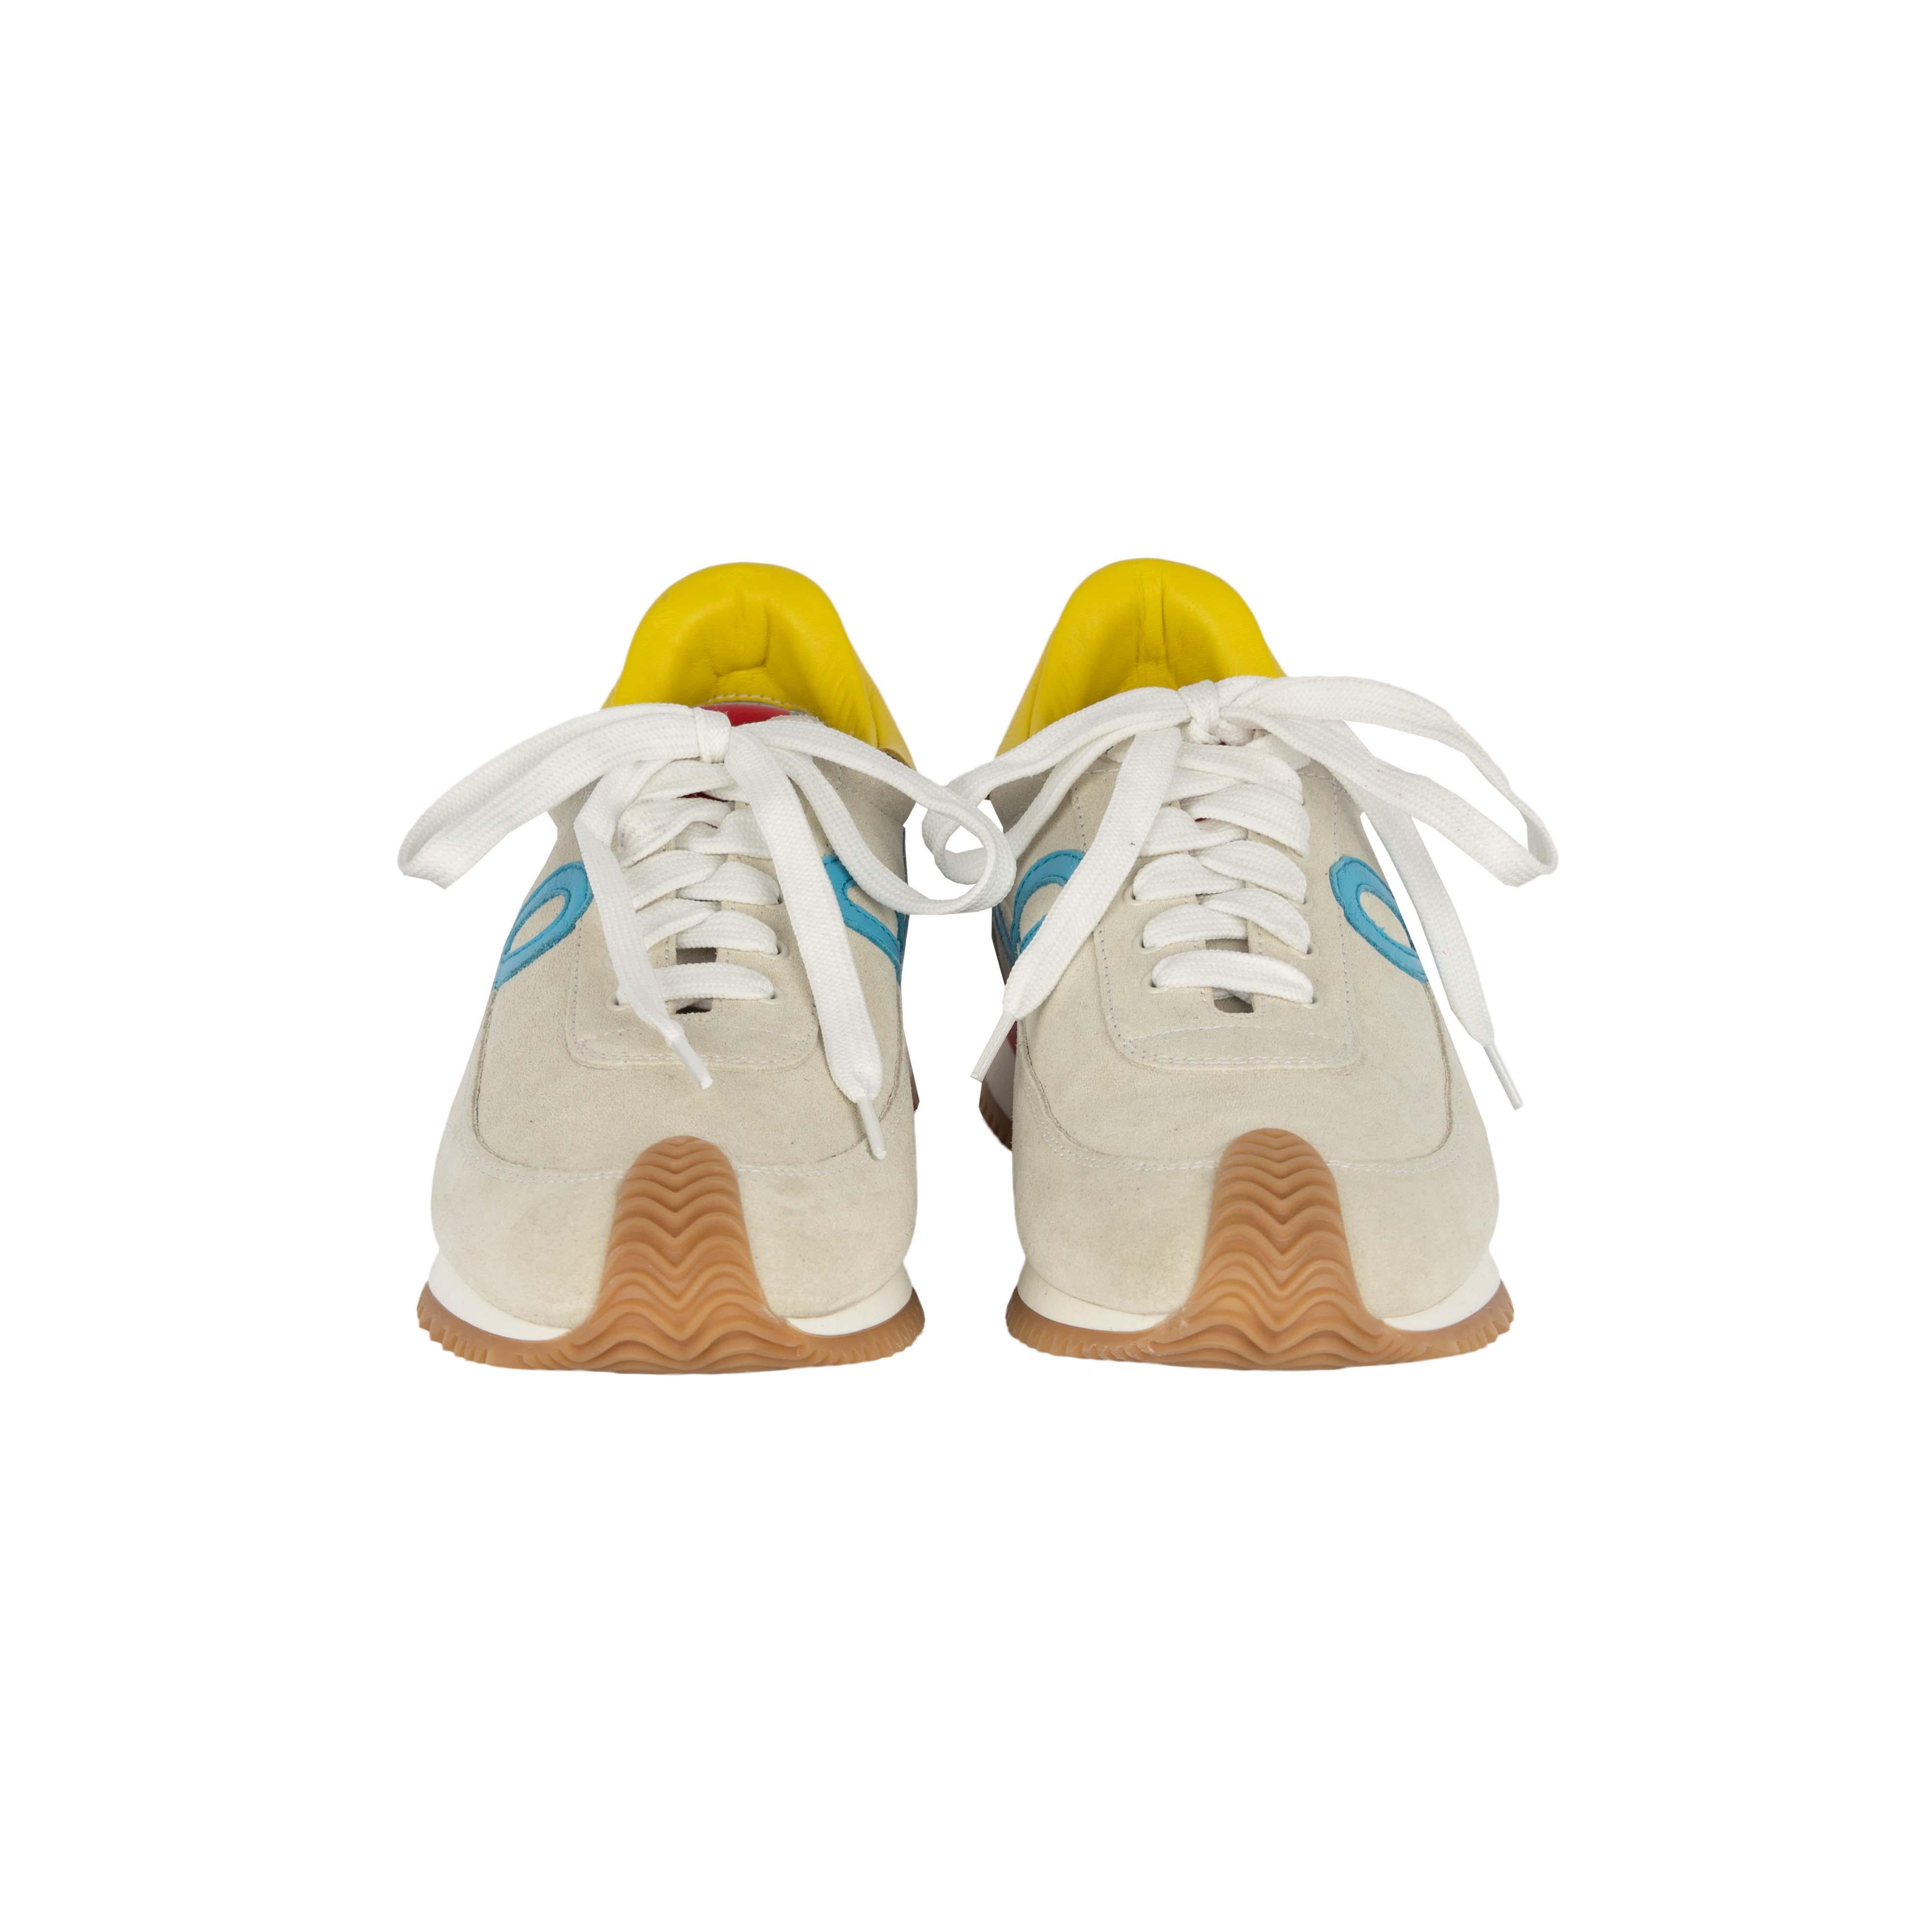 Made in Italy, the Loewe Flow Runner Sneakers has a grey canvas features the monogram etched on the red label on the tongue of the shoe, a cursive L shape depicting the brand and a pop of bright color with the yellow patch.

Insole Length - 26